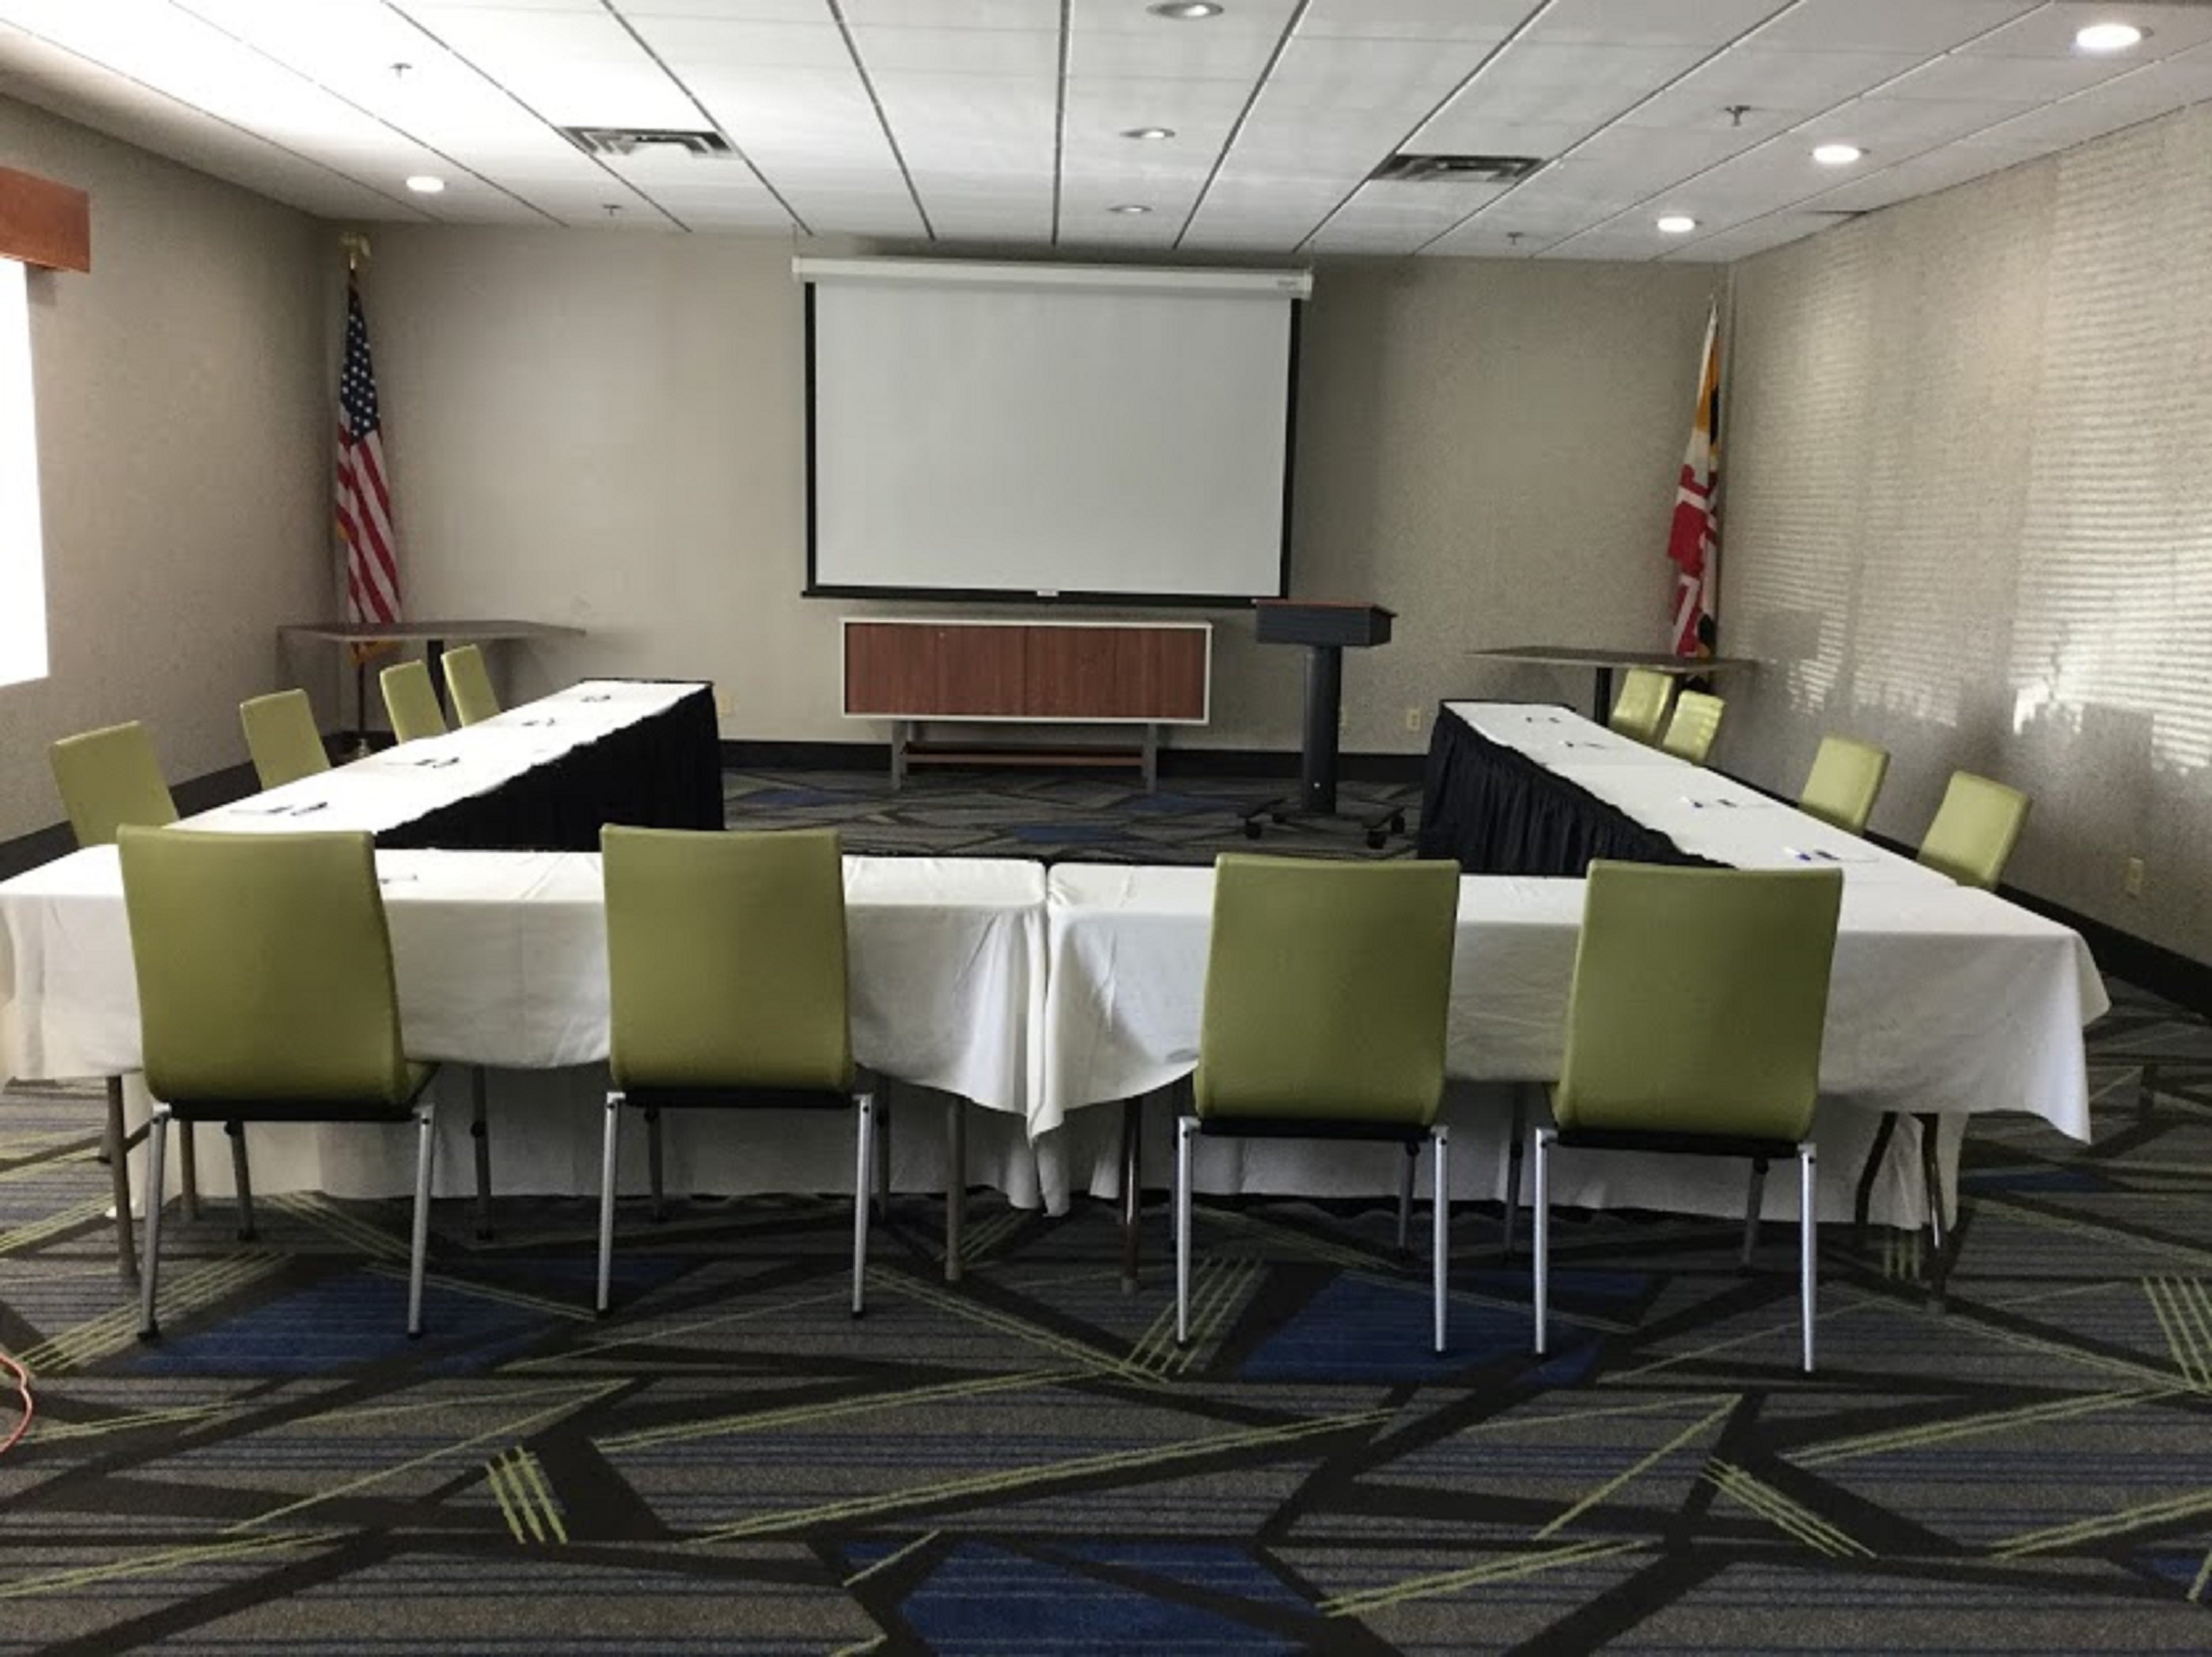 Our St. Michaels Meeting Room Set Up for 12 People